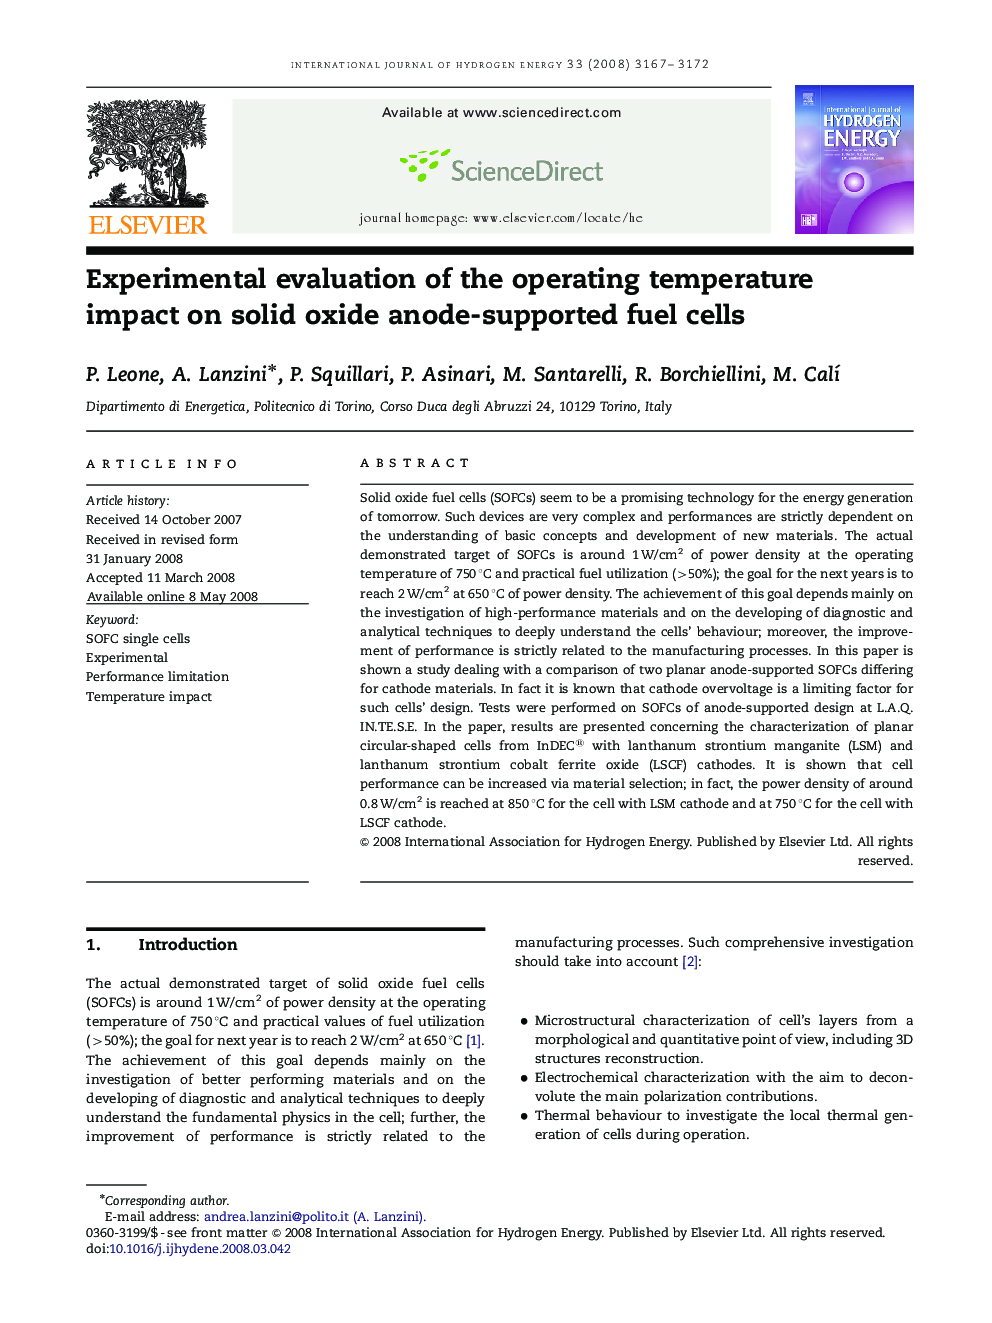 Experimental evaluation of the operating temperature impact on solid oxide anode-supported fuel cells